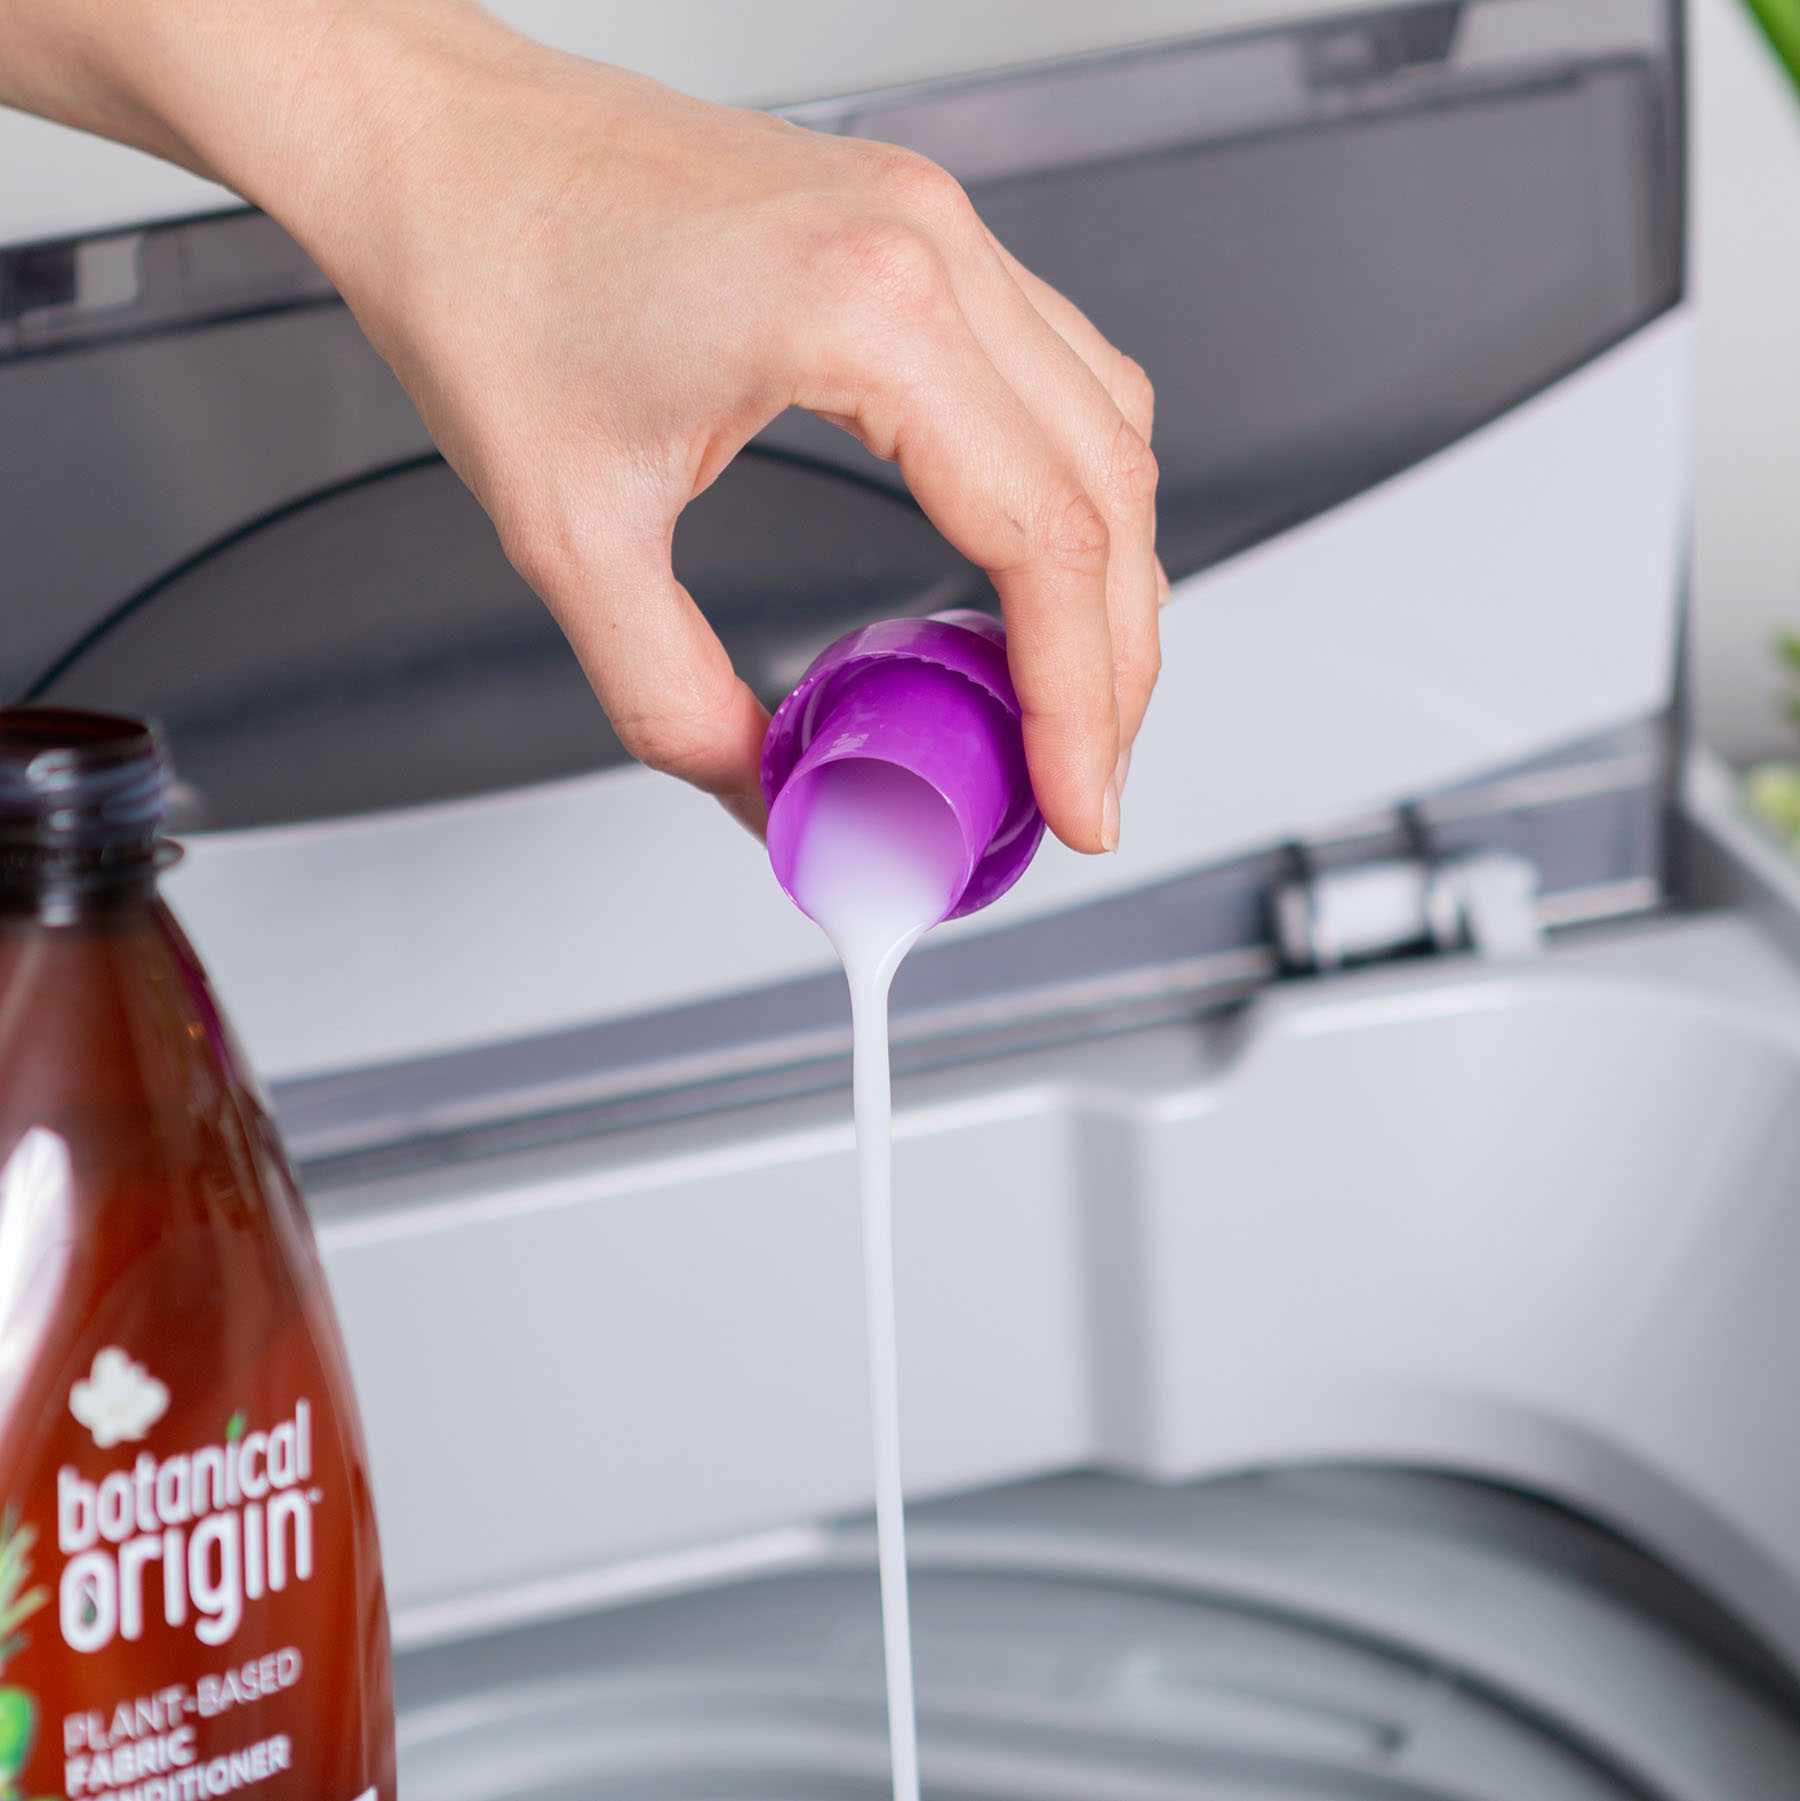 pouring fabric conditioner in to a washing machine